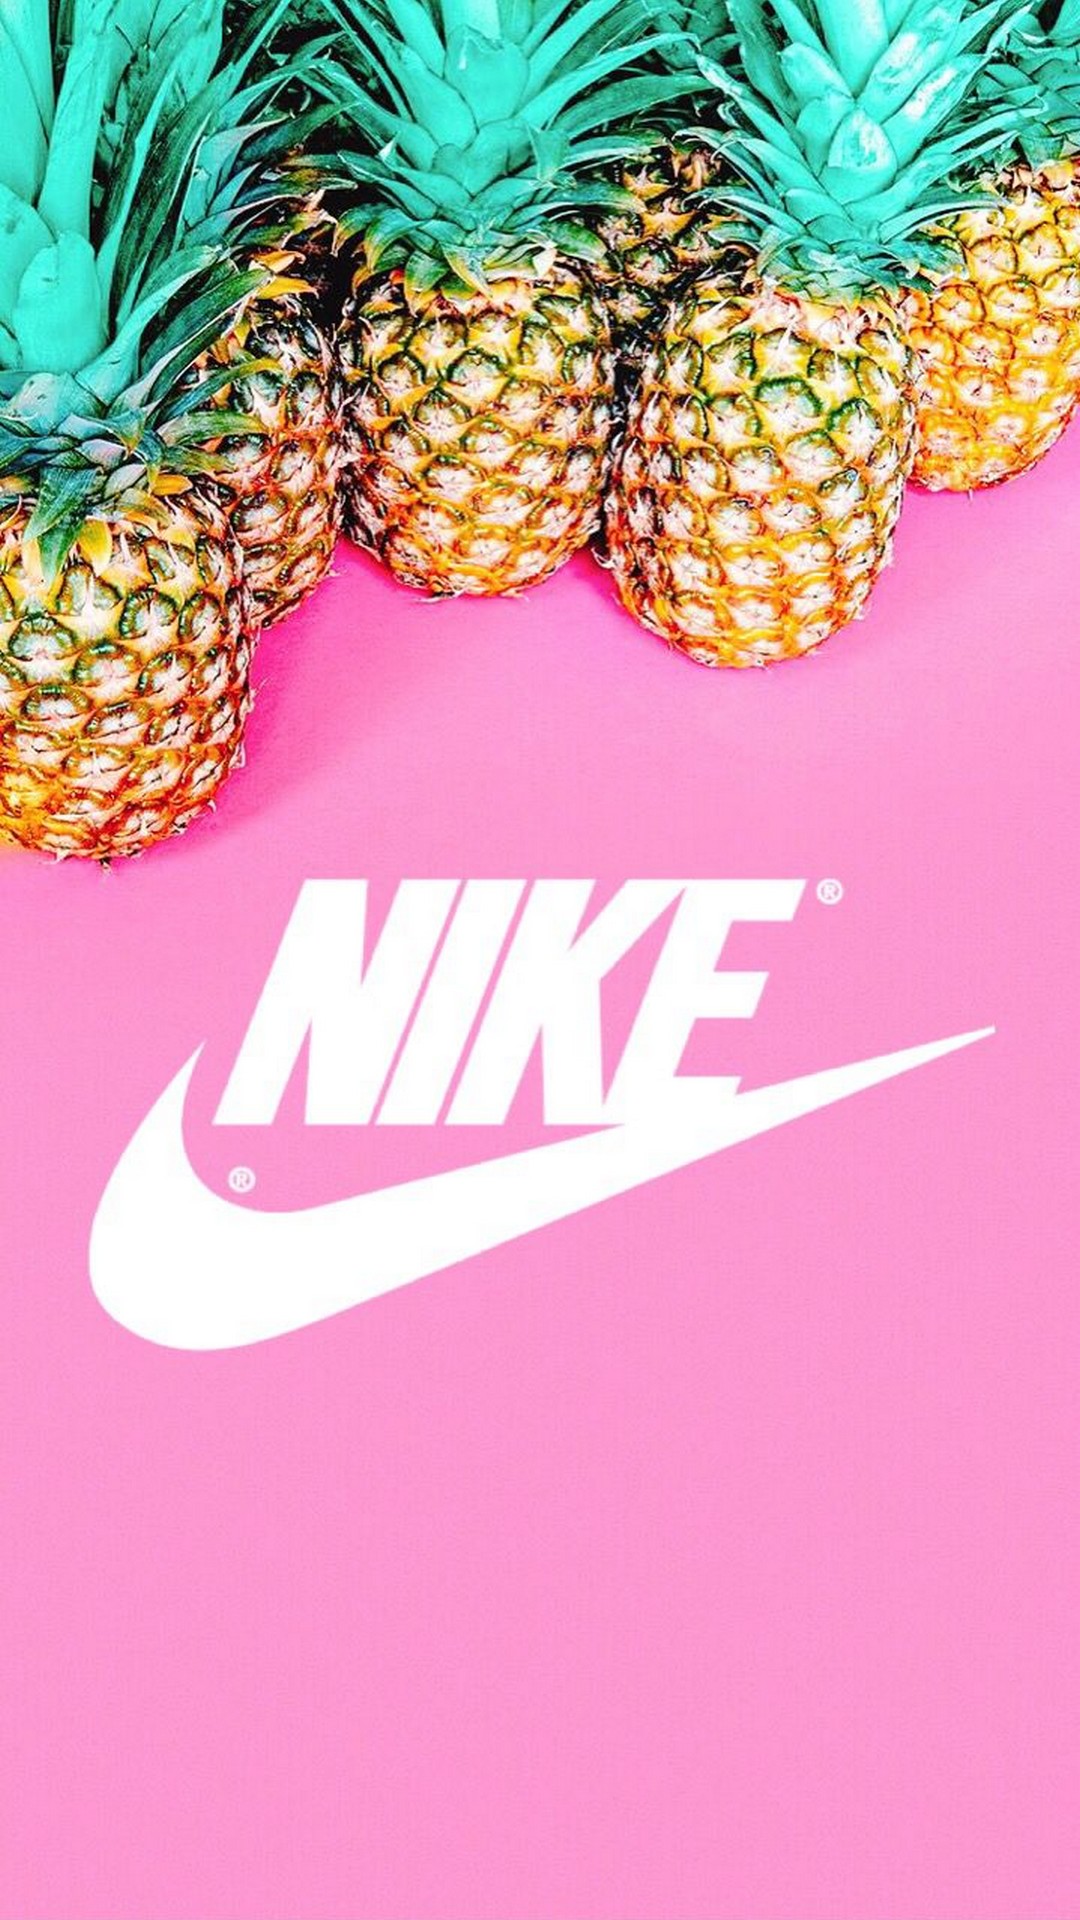 Nike Pineapple Pink Background resolution 1080x1920